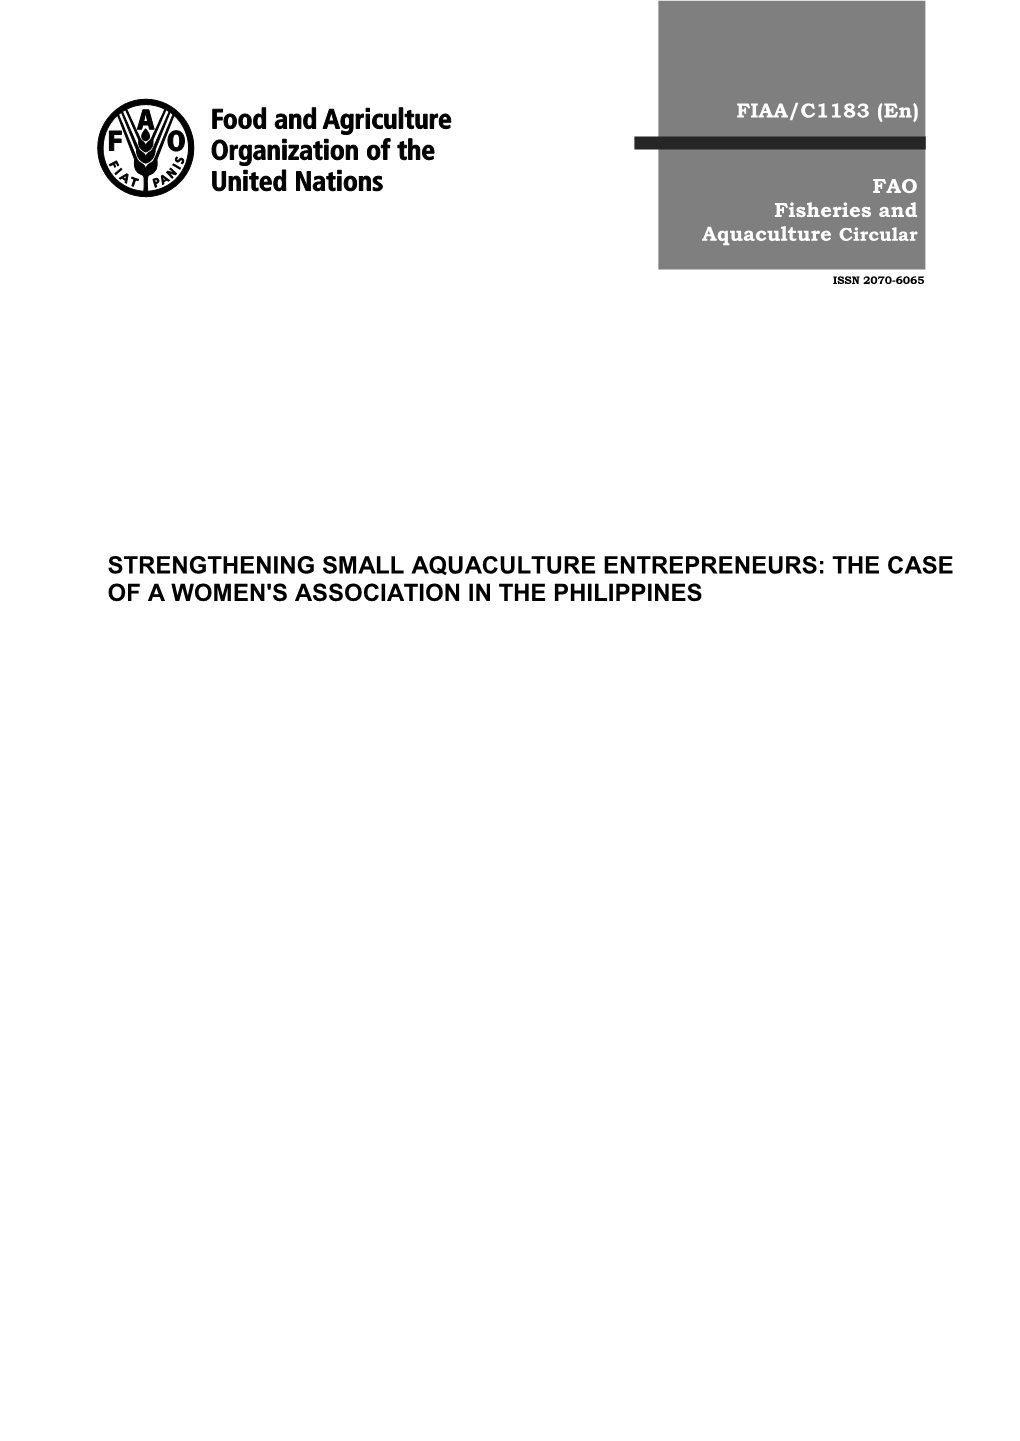 Strengthening Small Aquaculture Entrepreneurs: the Case of a Women's Association in the Philippines